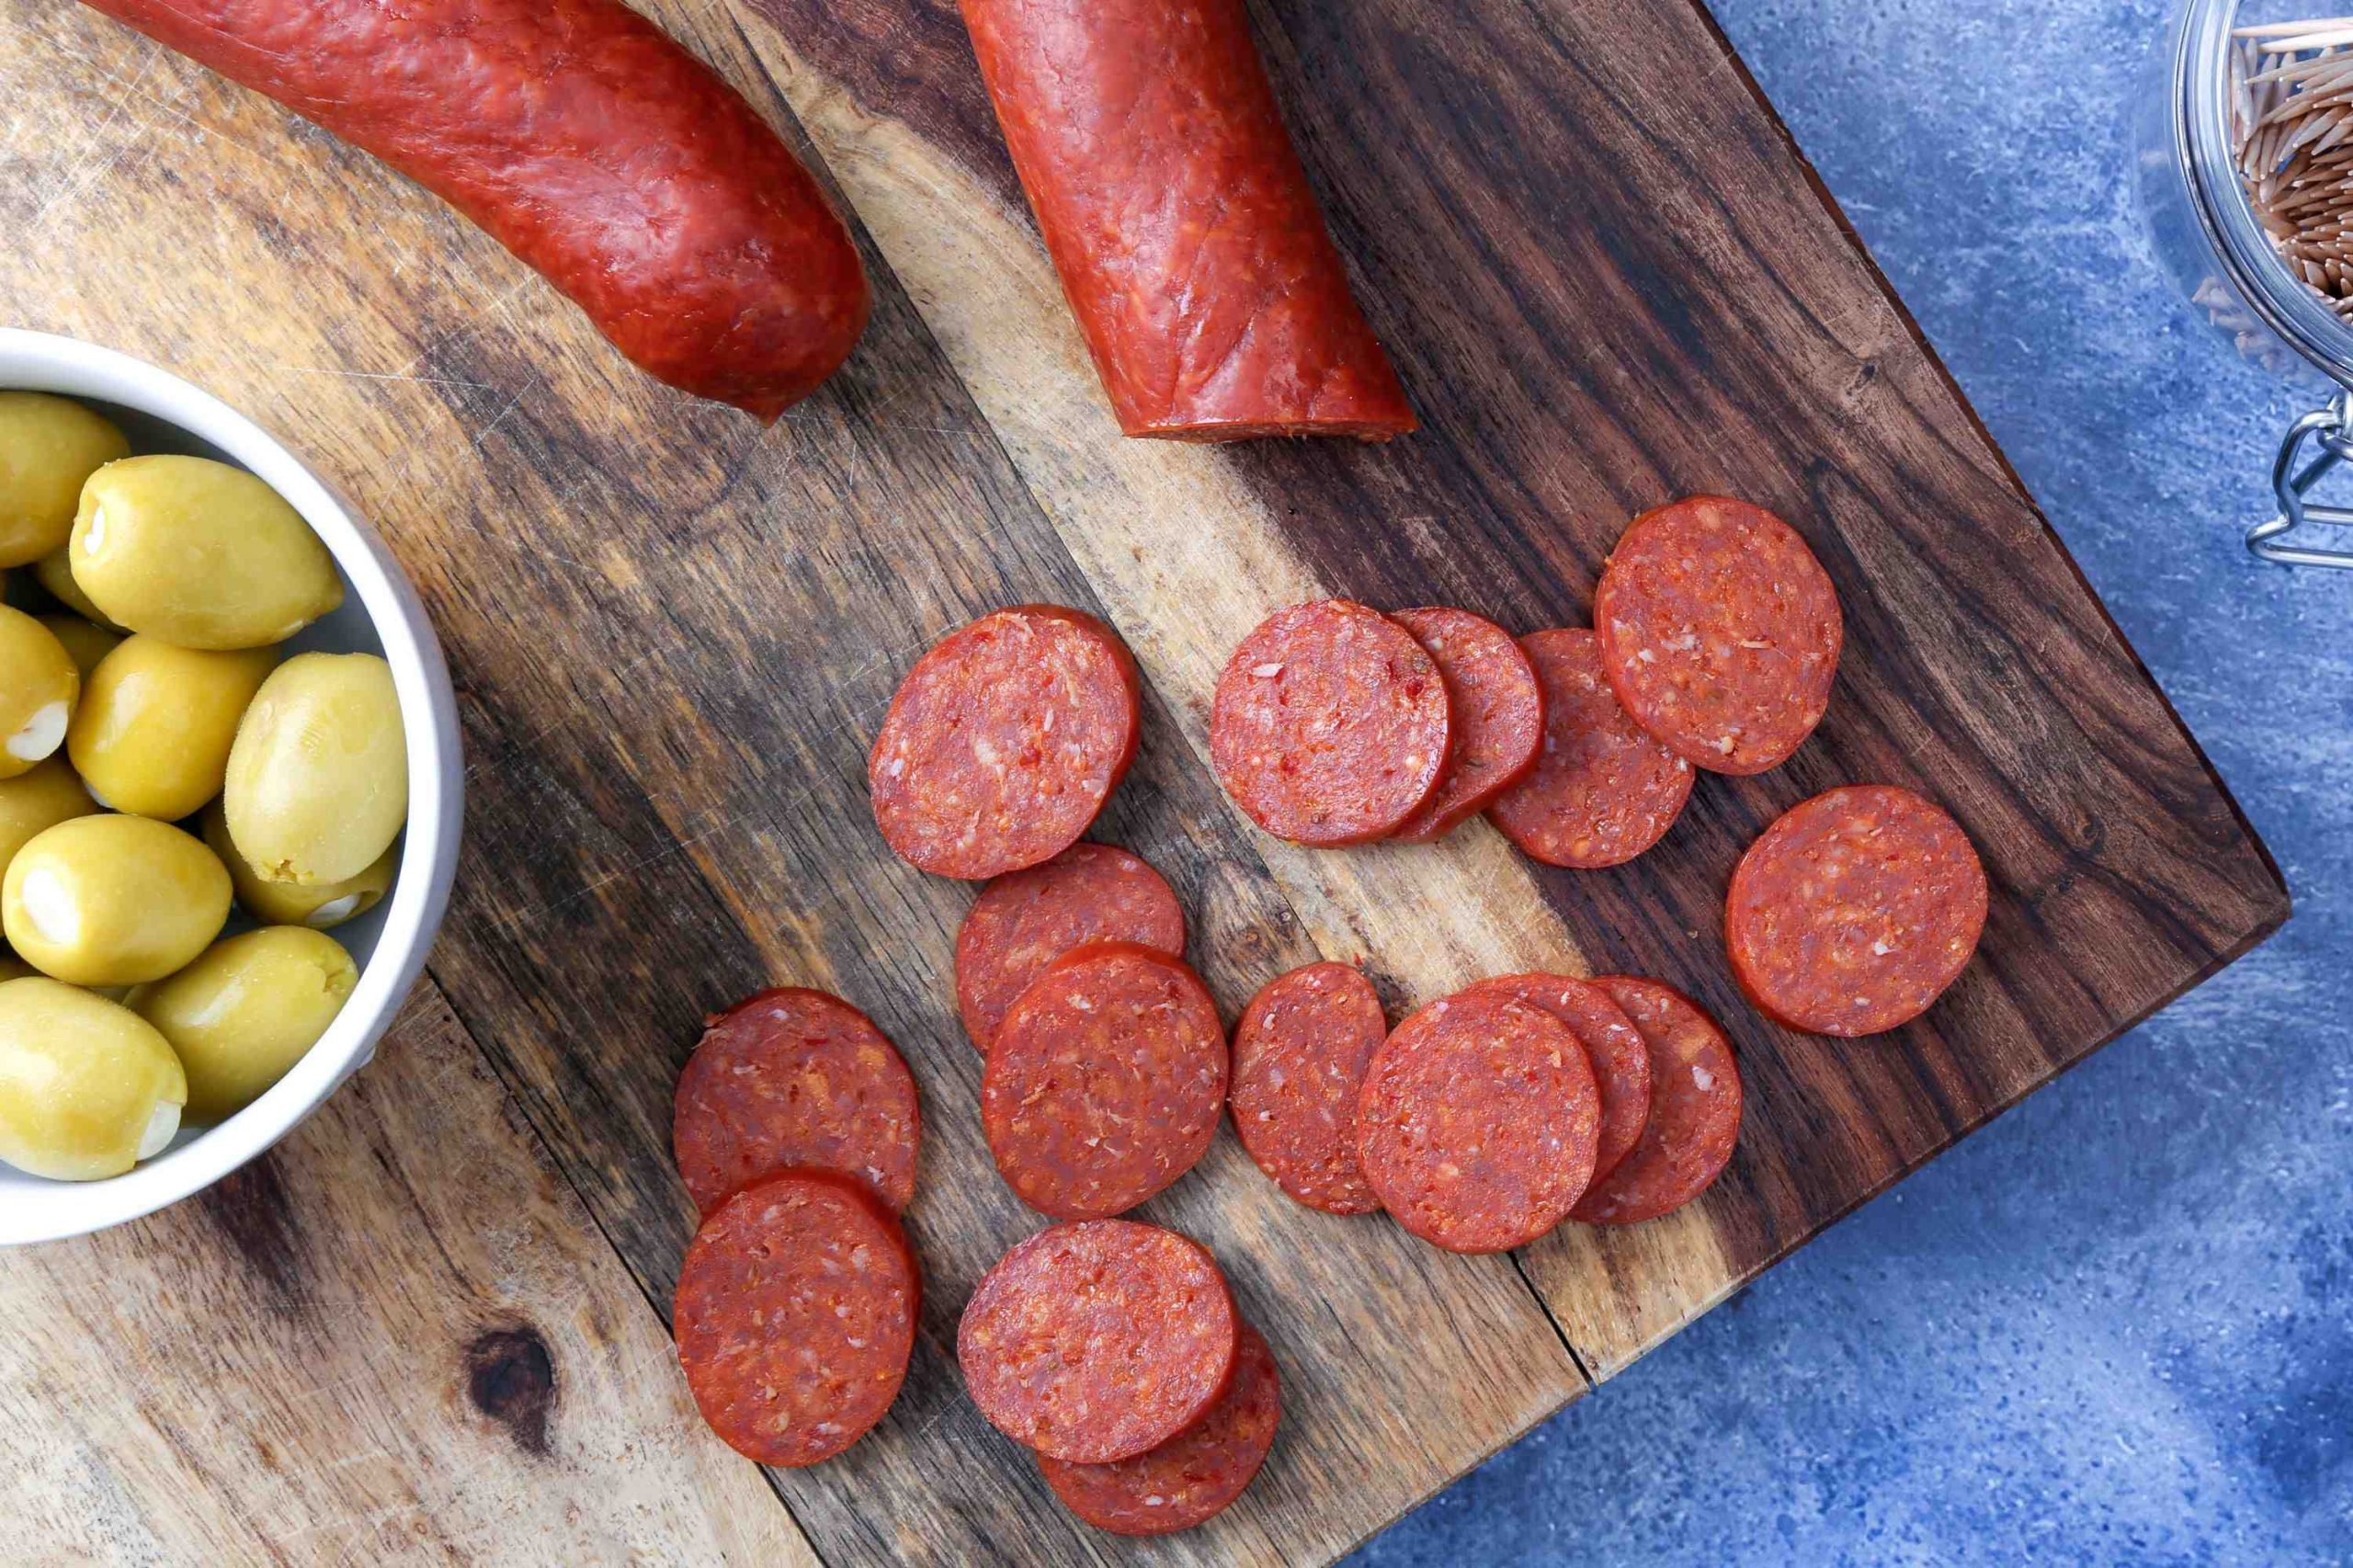 Is there pepperoni without pork?